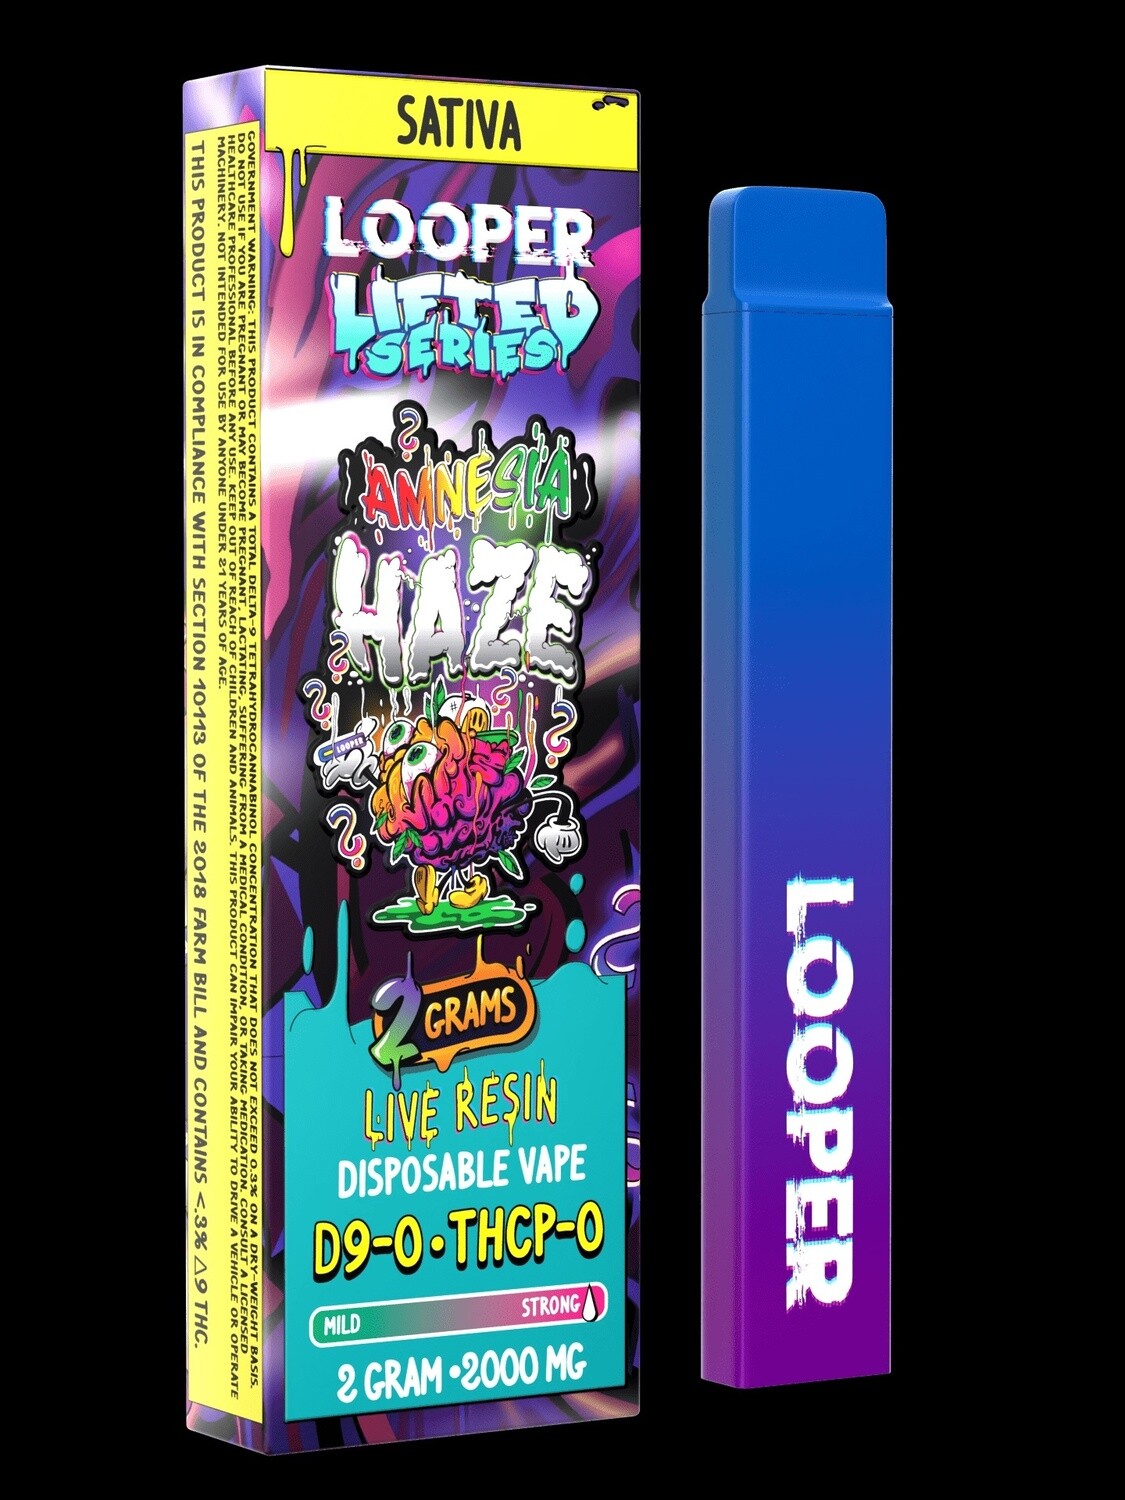 Looper Lifted Series Live Resin 2 Gram Disposables